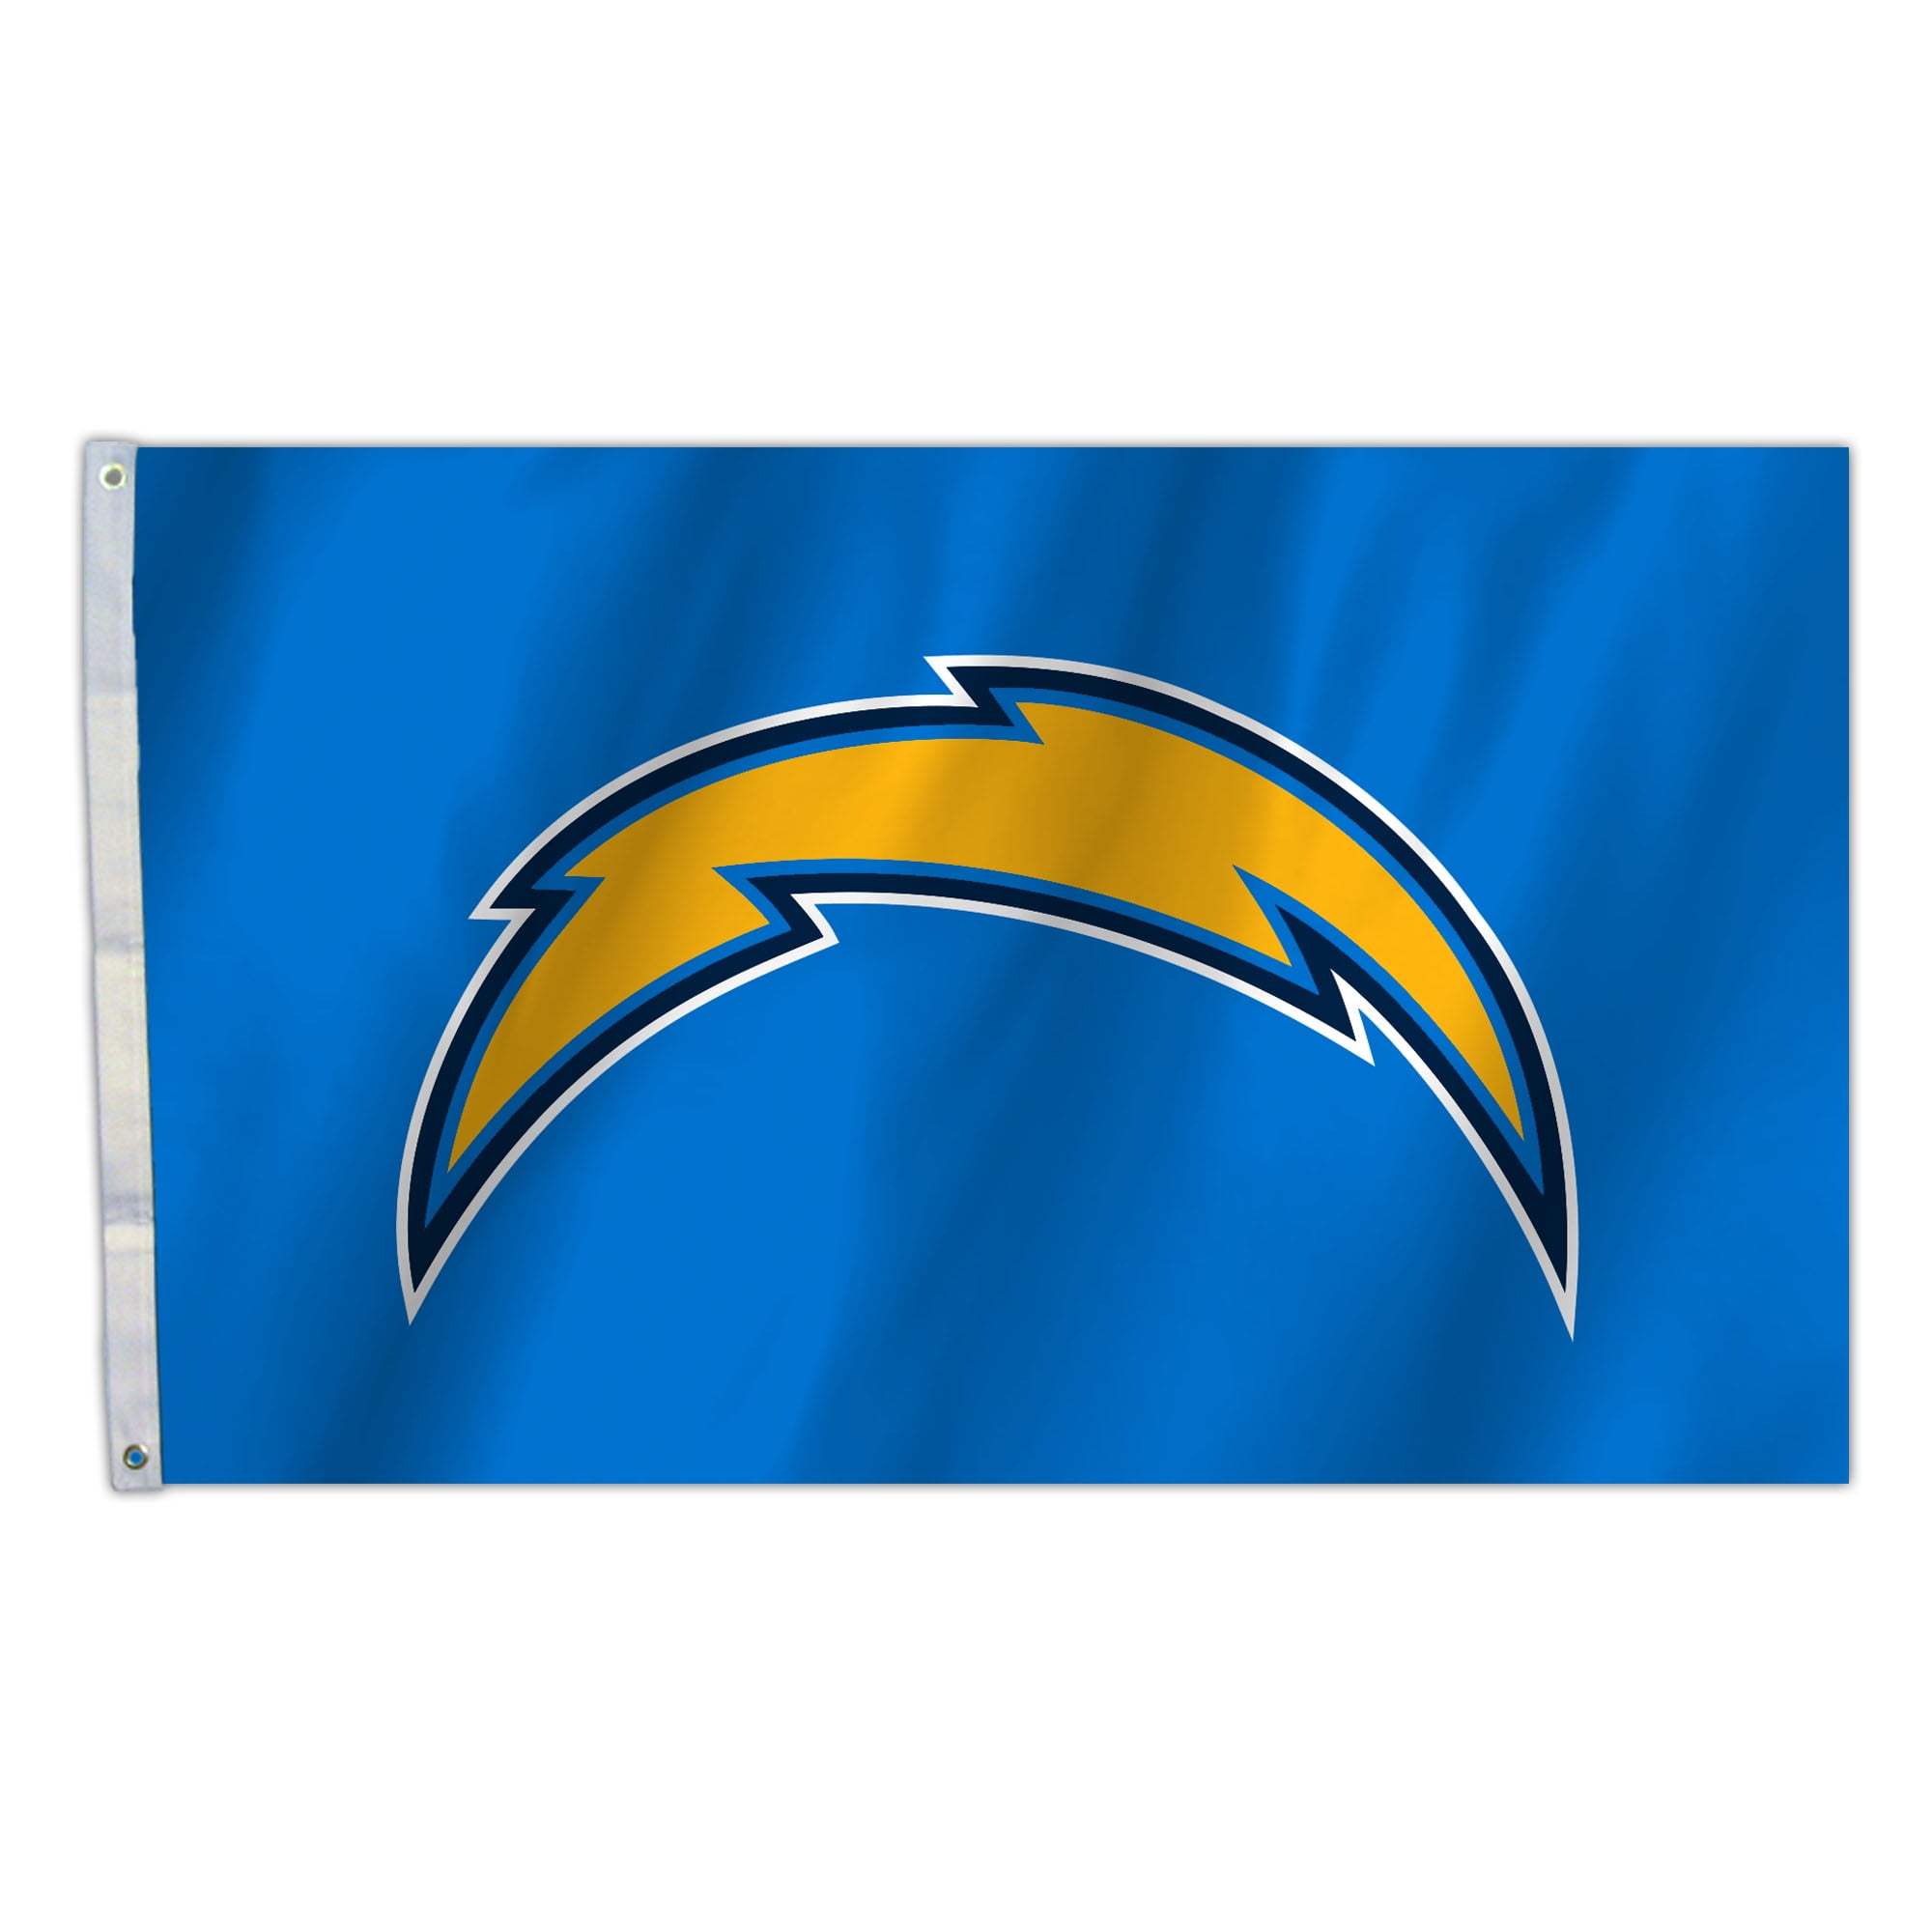 Fremont Die NCAA 3 x 5-Foot Flag with Grommets 